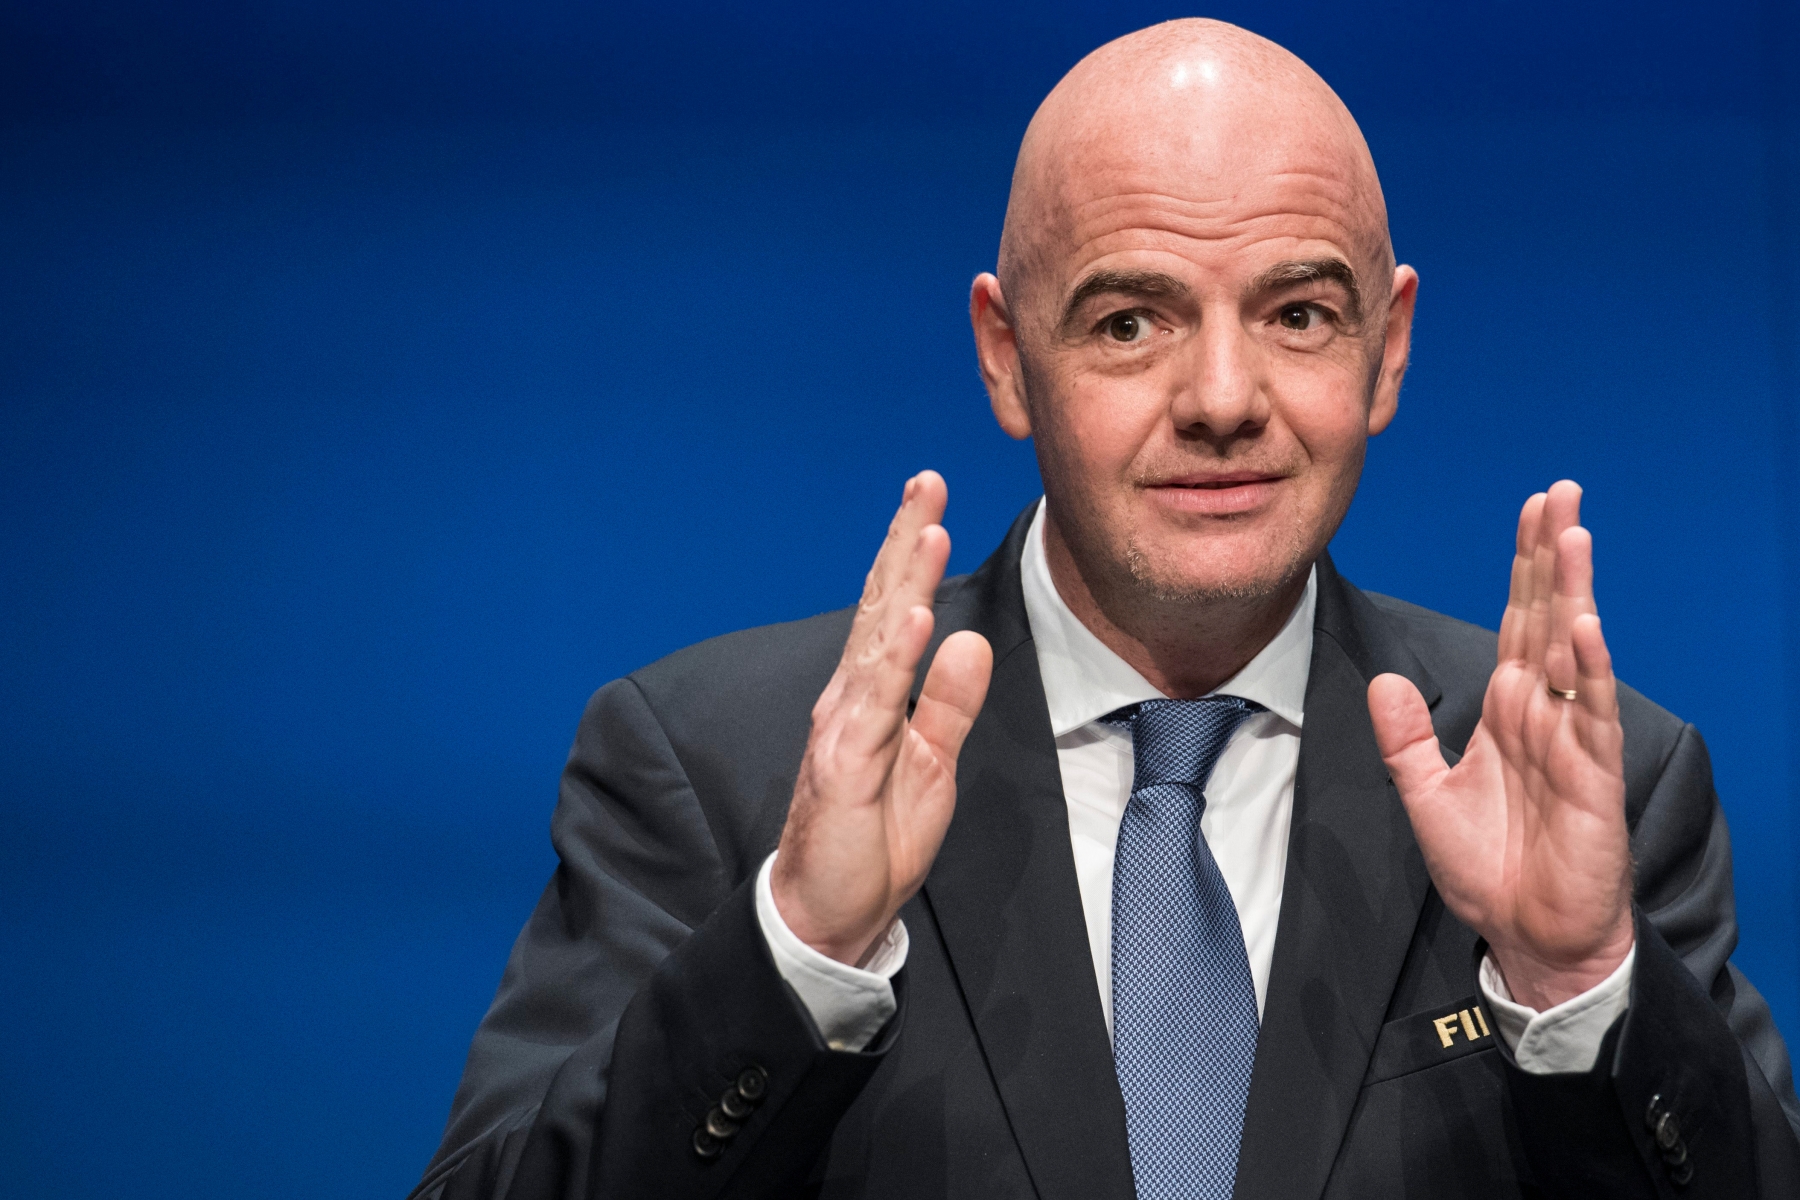 Gianni Infantino, FIFA President speaks after the FIFA Council meeting at the Home of FIFA in Zurich, Switzerland, Tuesday, January 10, 2017. (KEYSTONE/Ennio Leanza) FUSSBALL FIFA TREFFEN COUNCIL